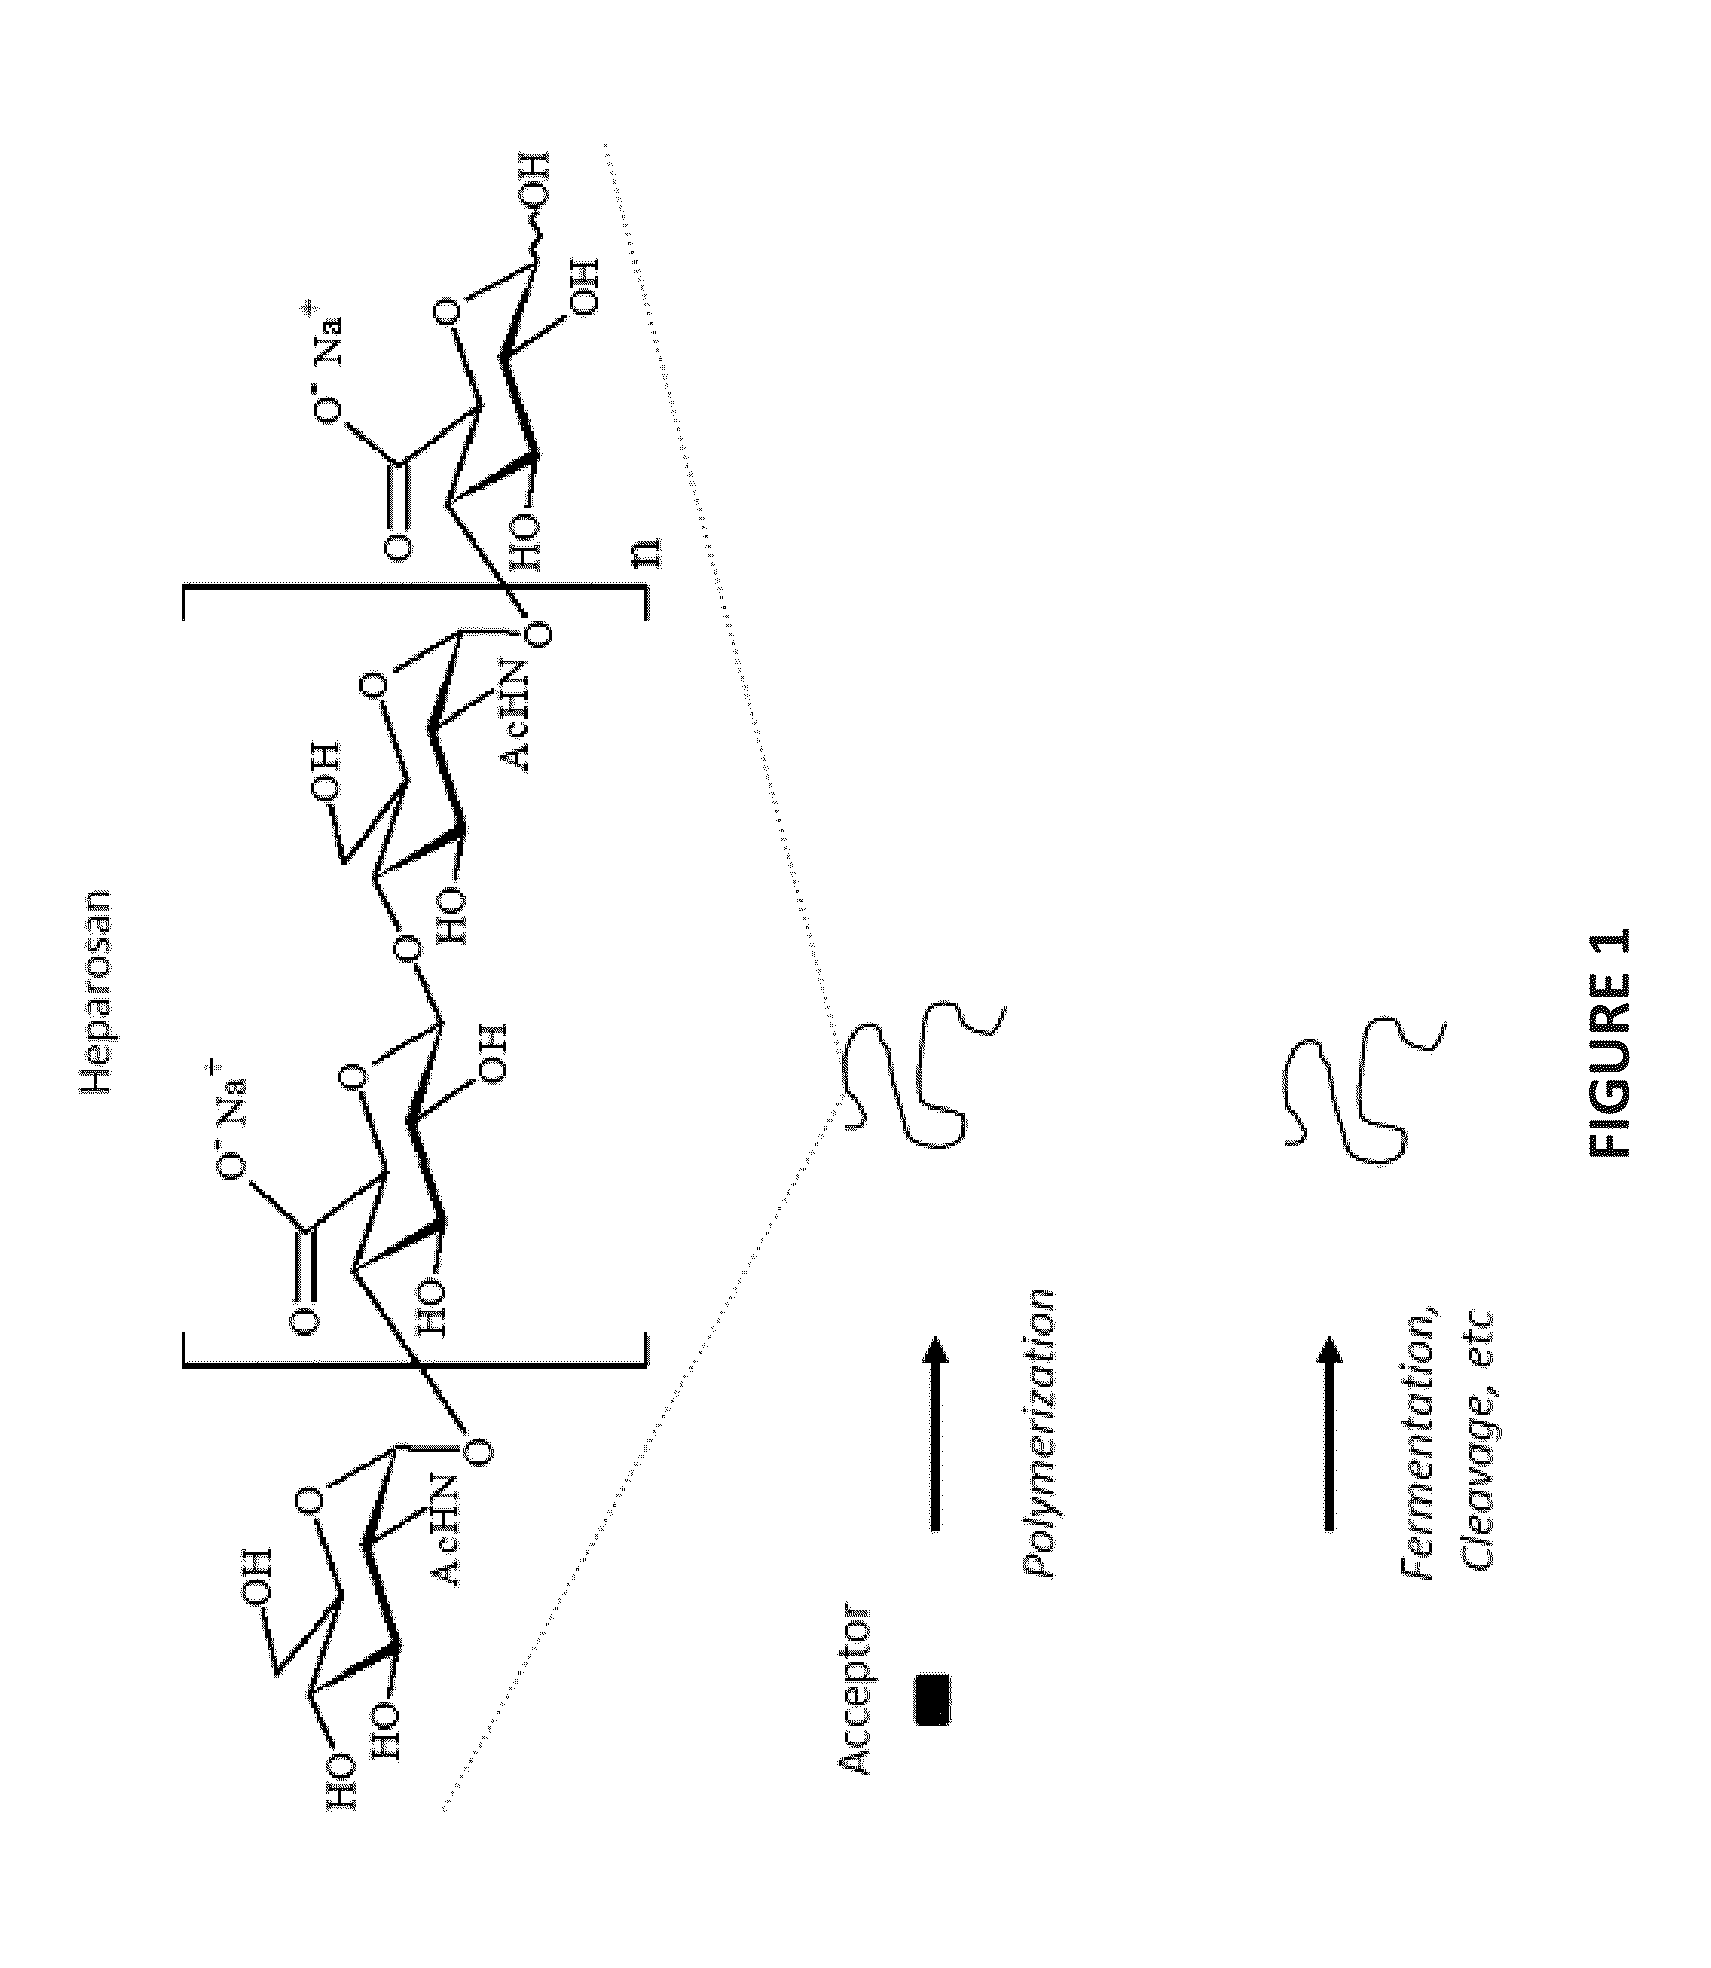 Heparosan/Therapeutic Prodrug Complexes and Methods of Making and Using Same